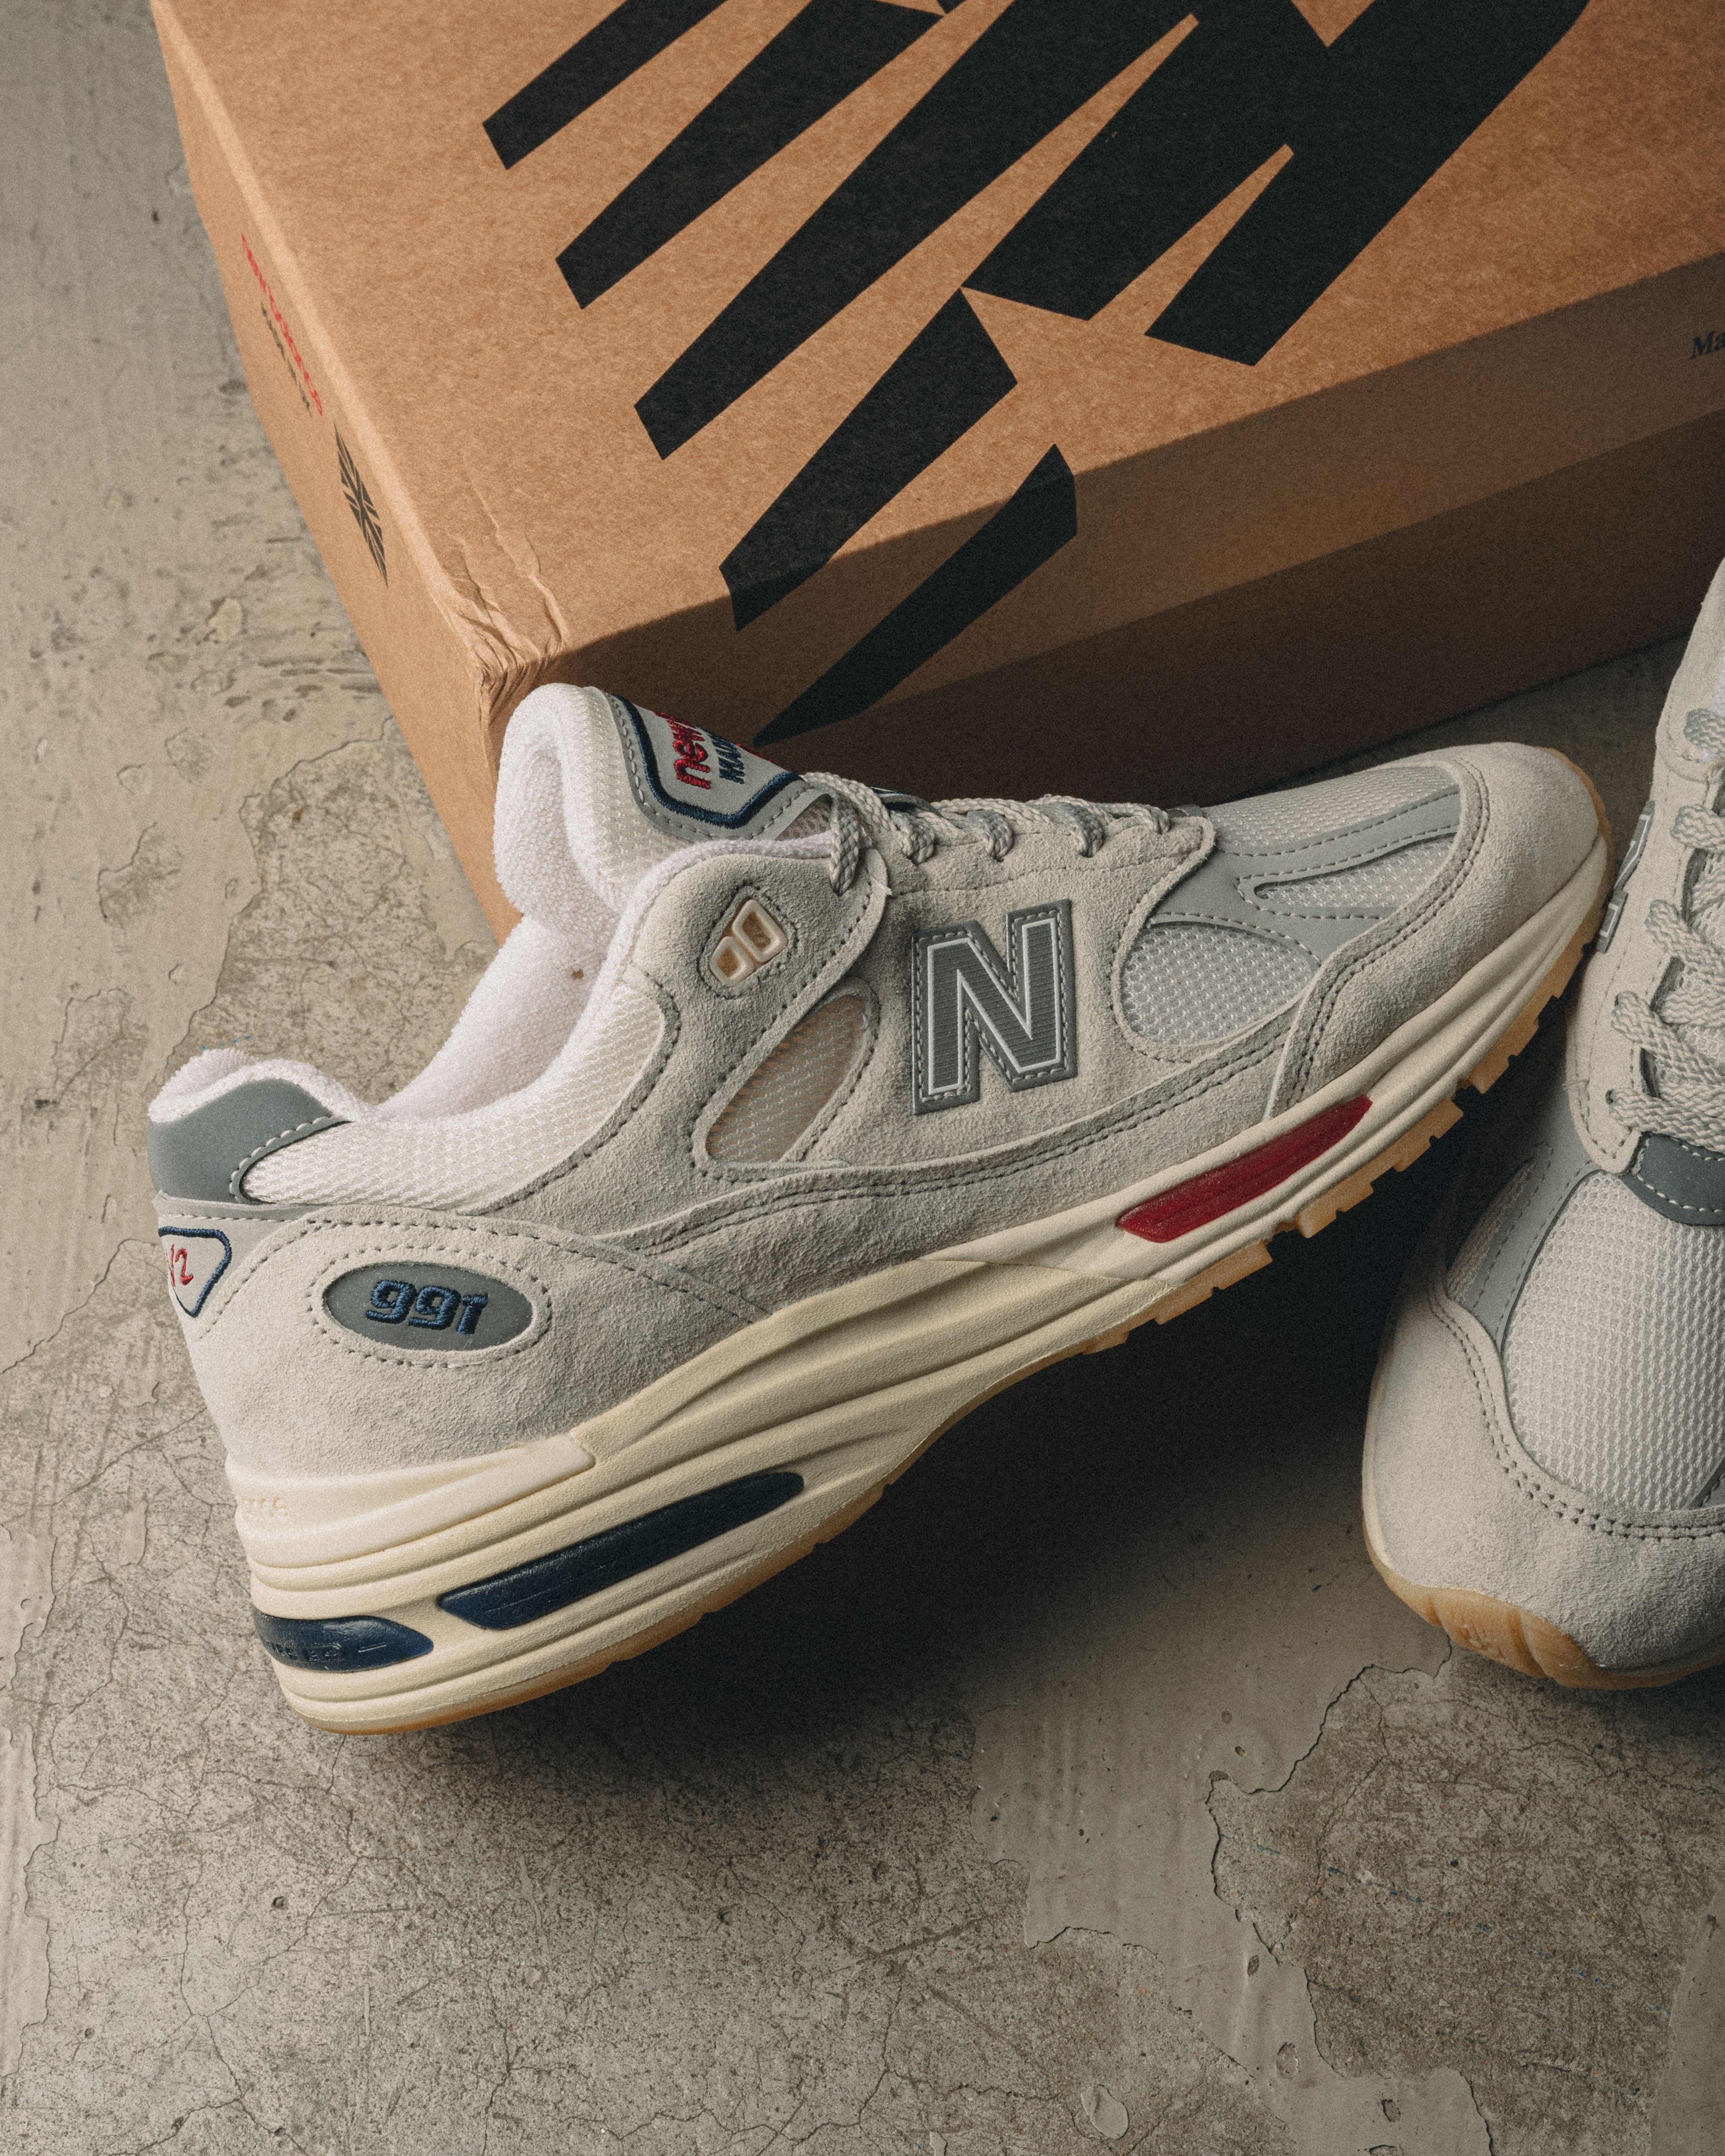 The New Balance 991 Surfaces in 